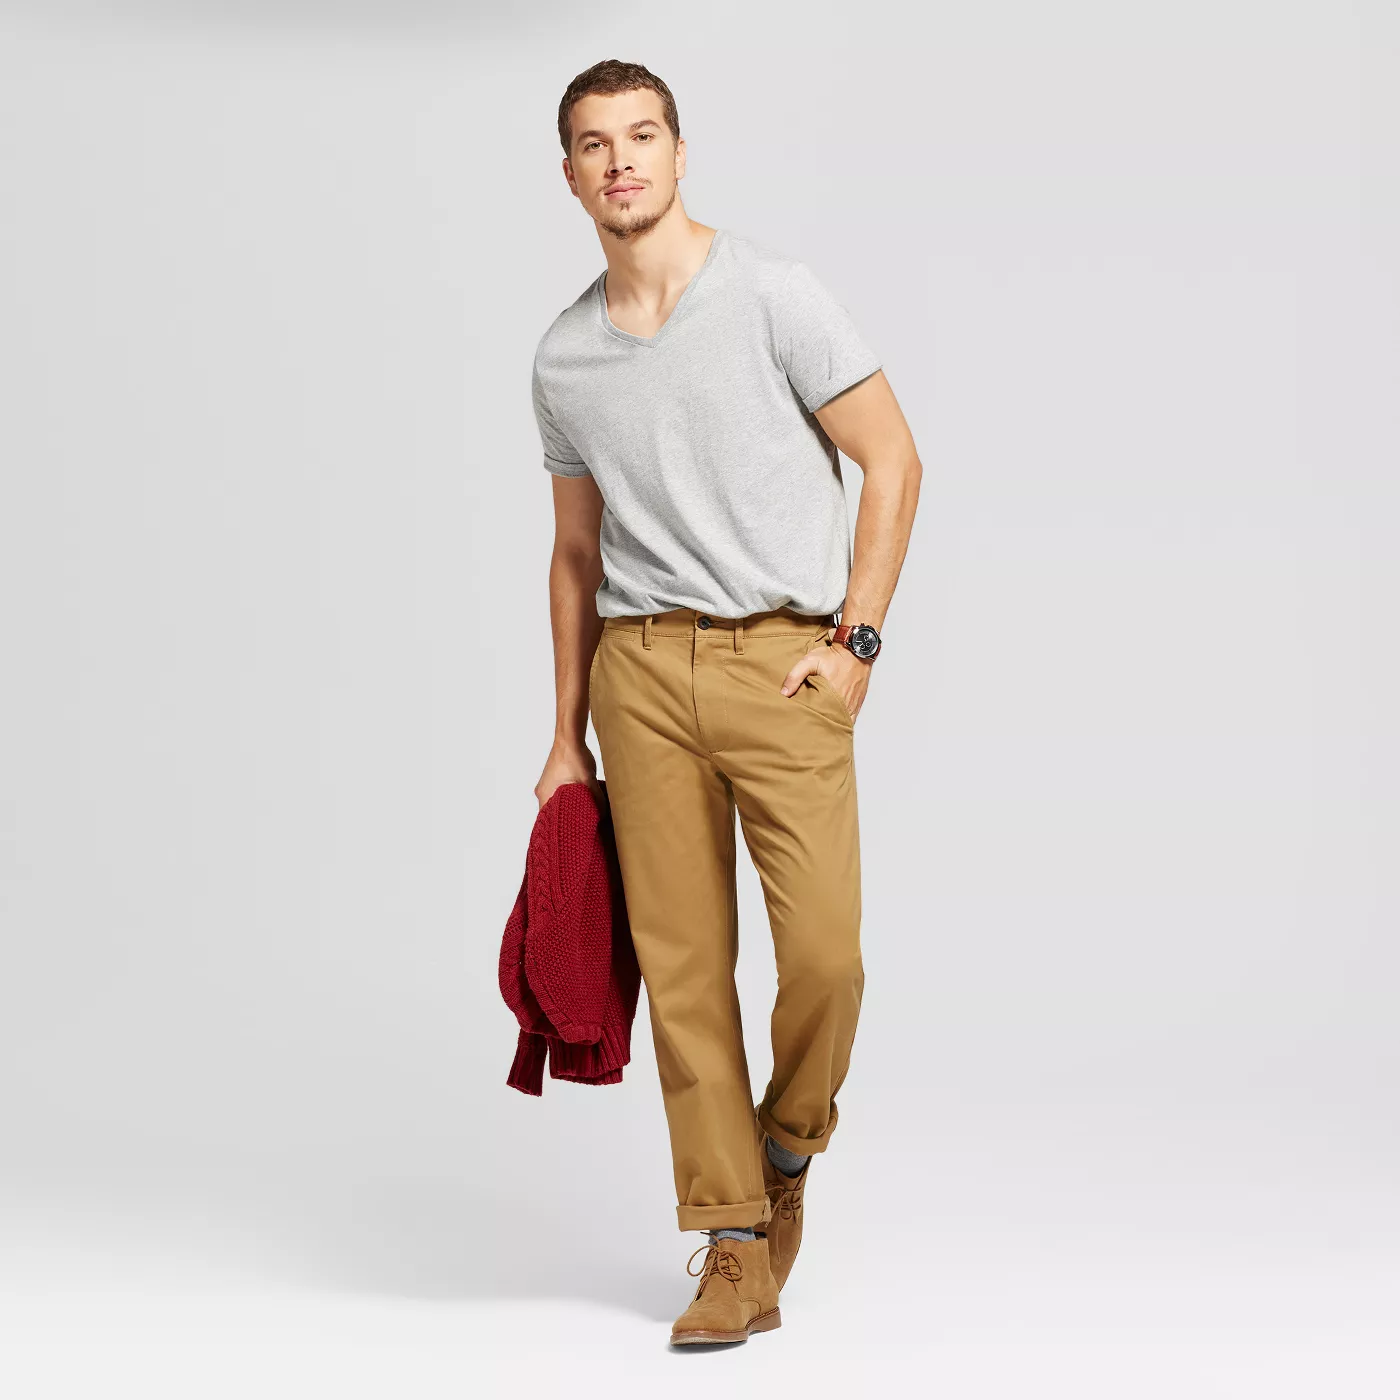 29 Basic Pieces Of Menswear From Target You'll Probably Wear Over And ...